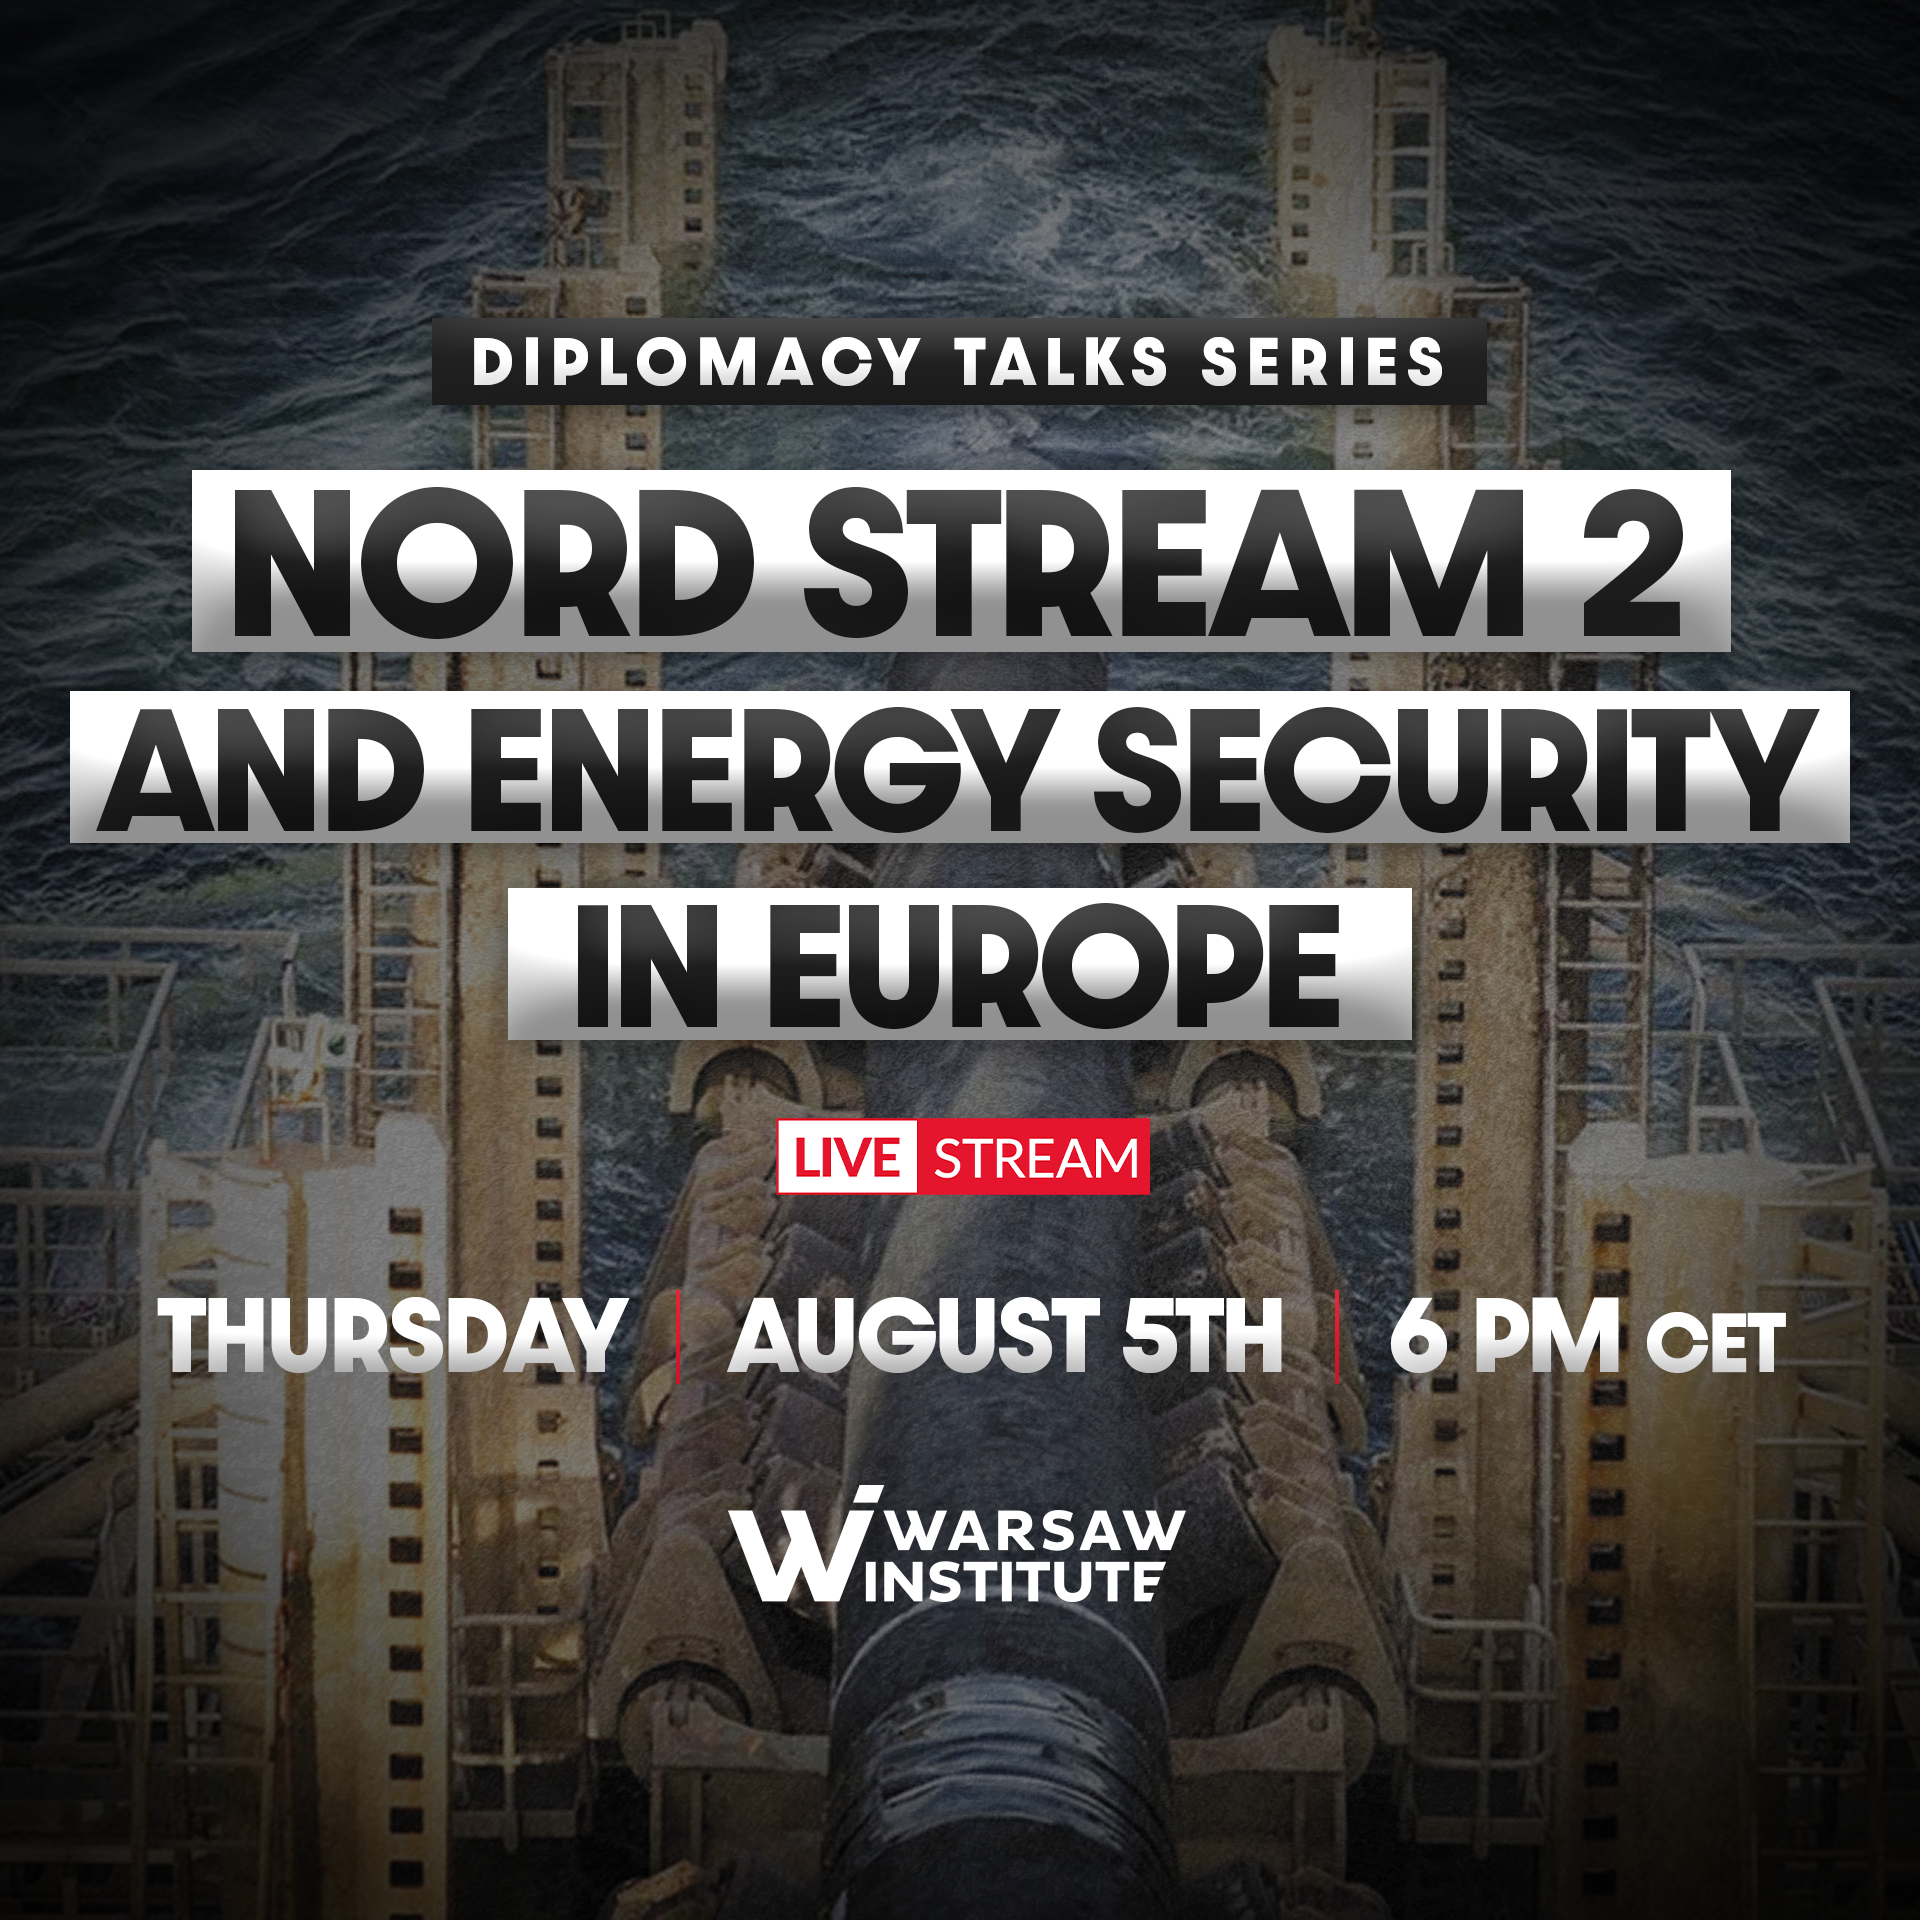 Nord Stream 2 and energy security in Europe | Diplomacy Talks Series